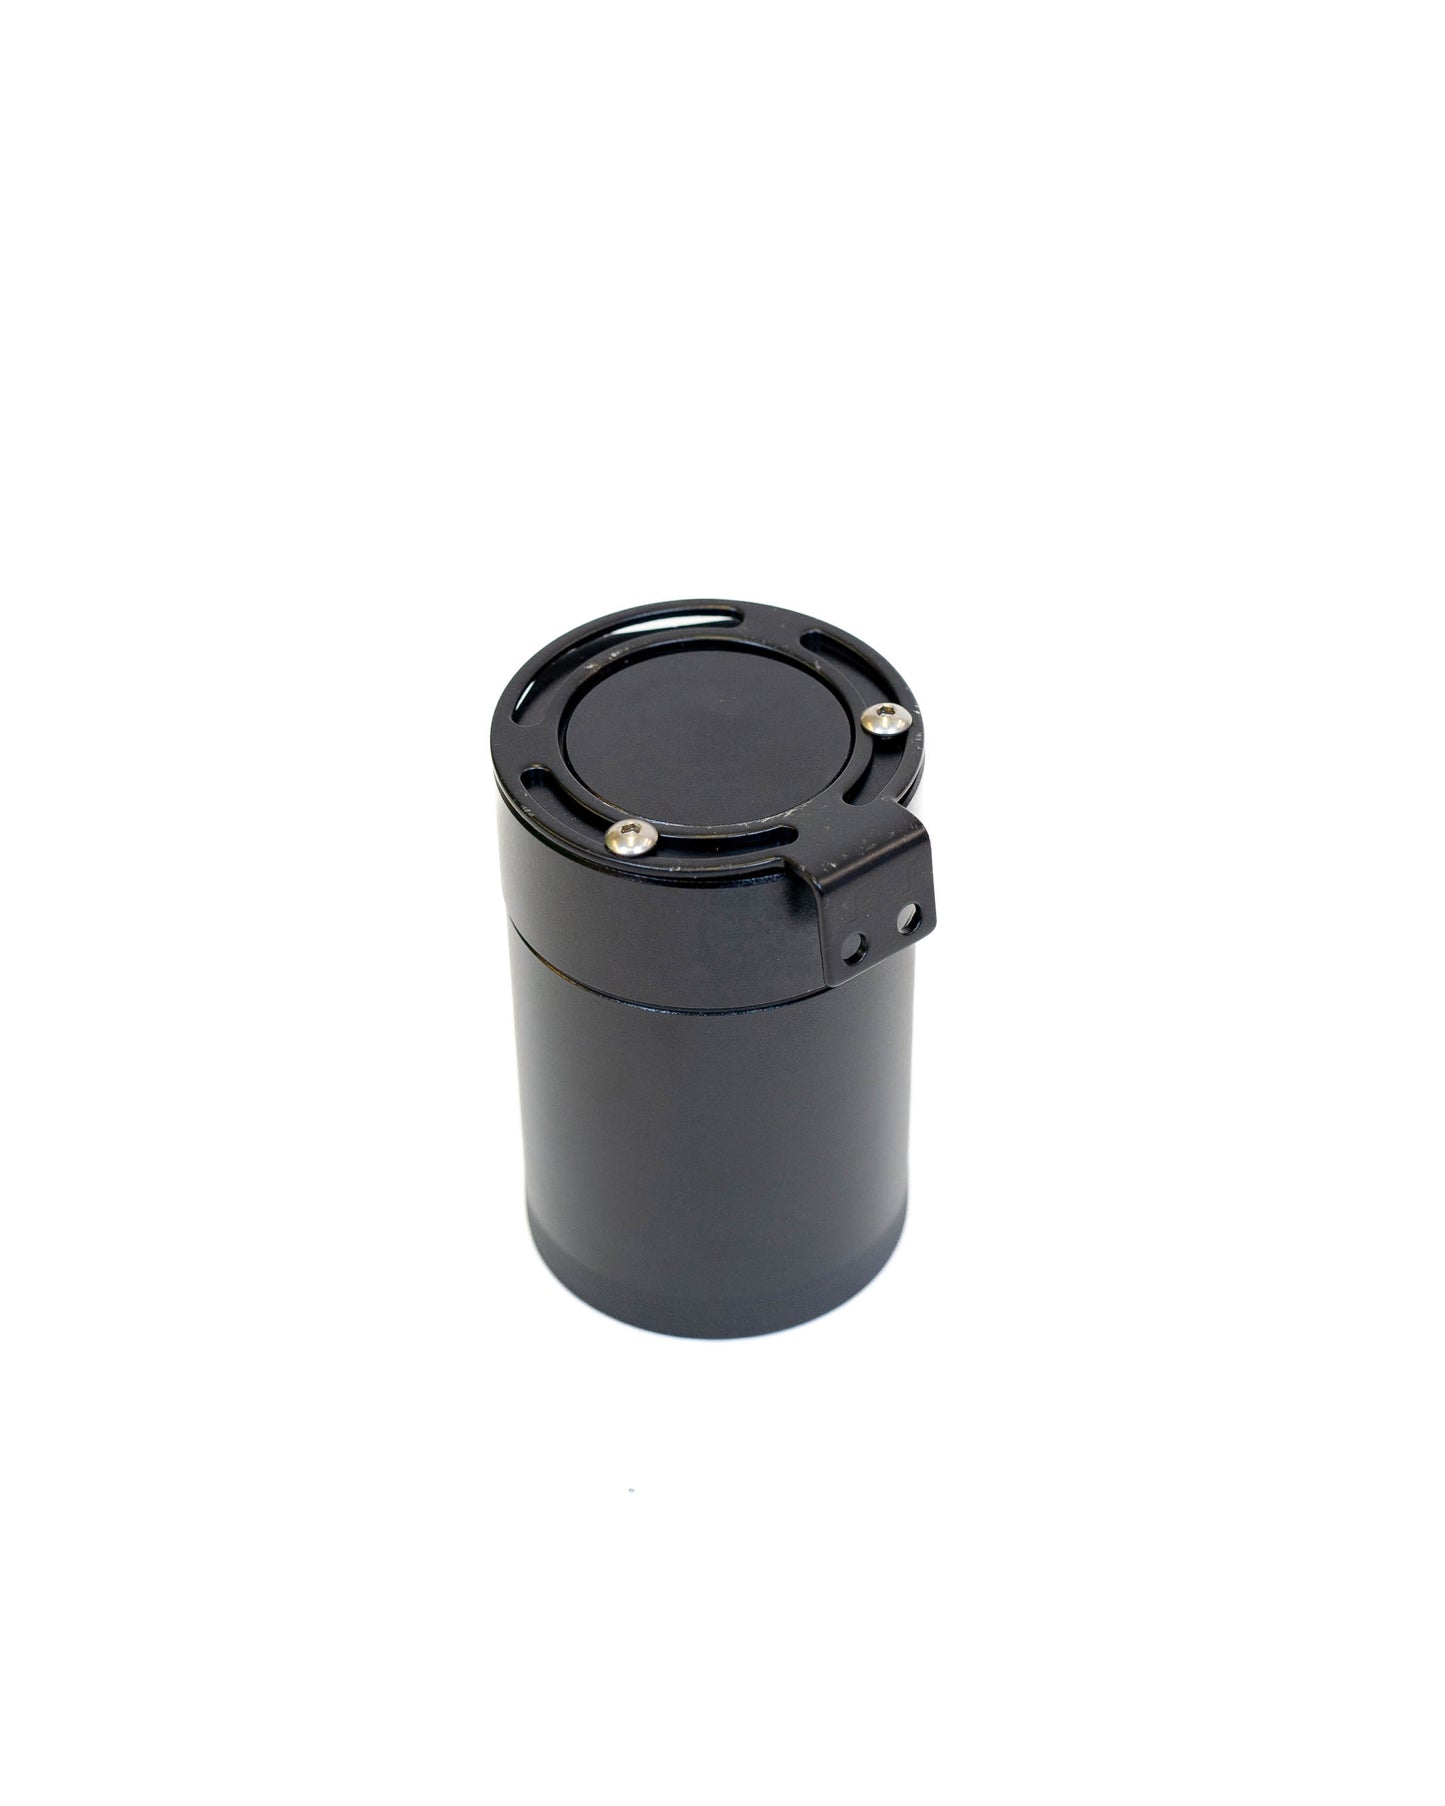 Direct Injection Oil Catch Can Kit